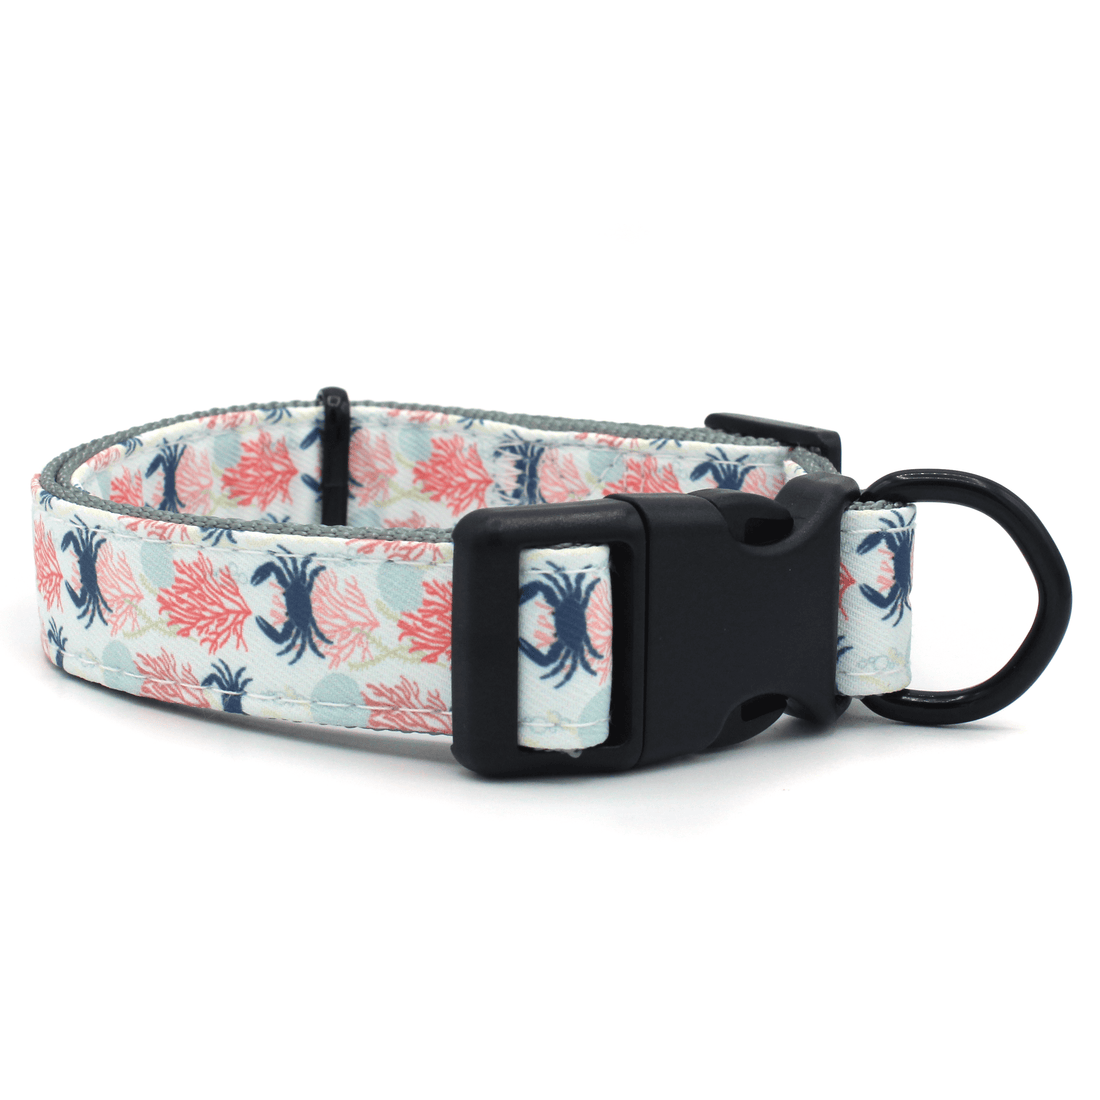 dog collar with blue crab, seashell, and coral pattern, with black hardware